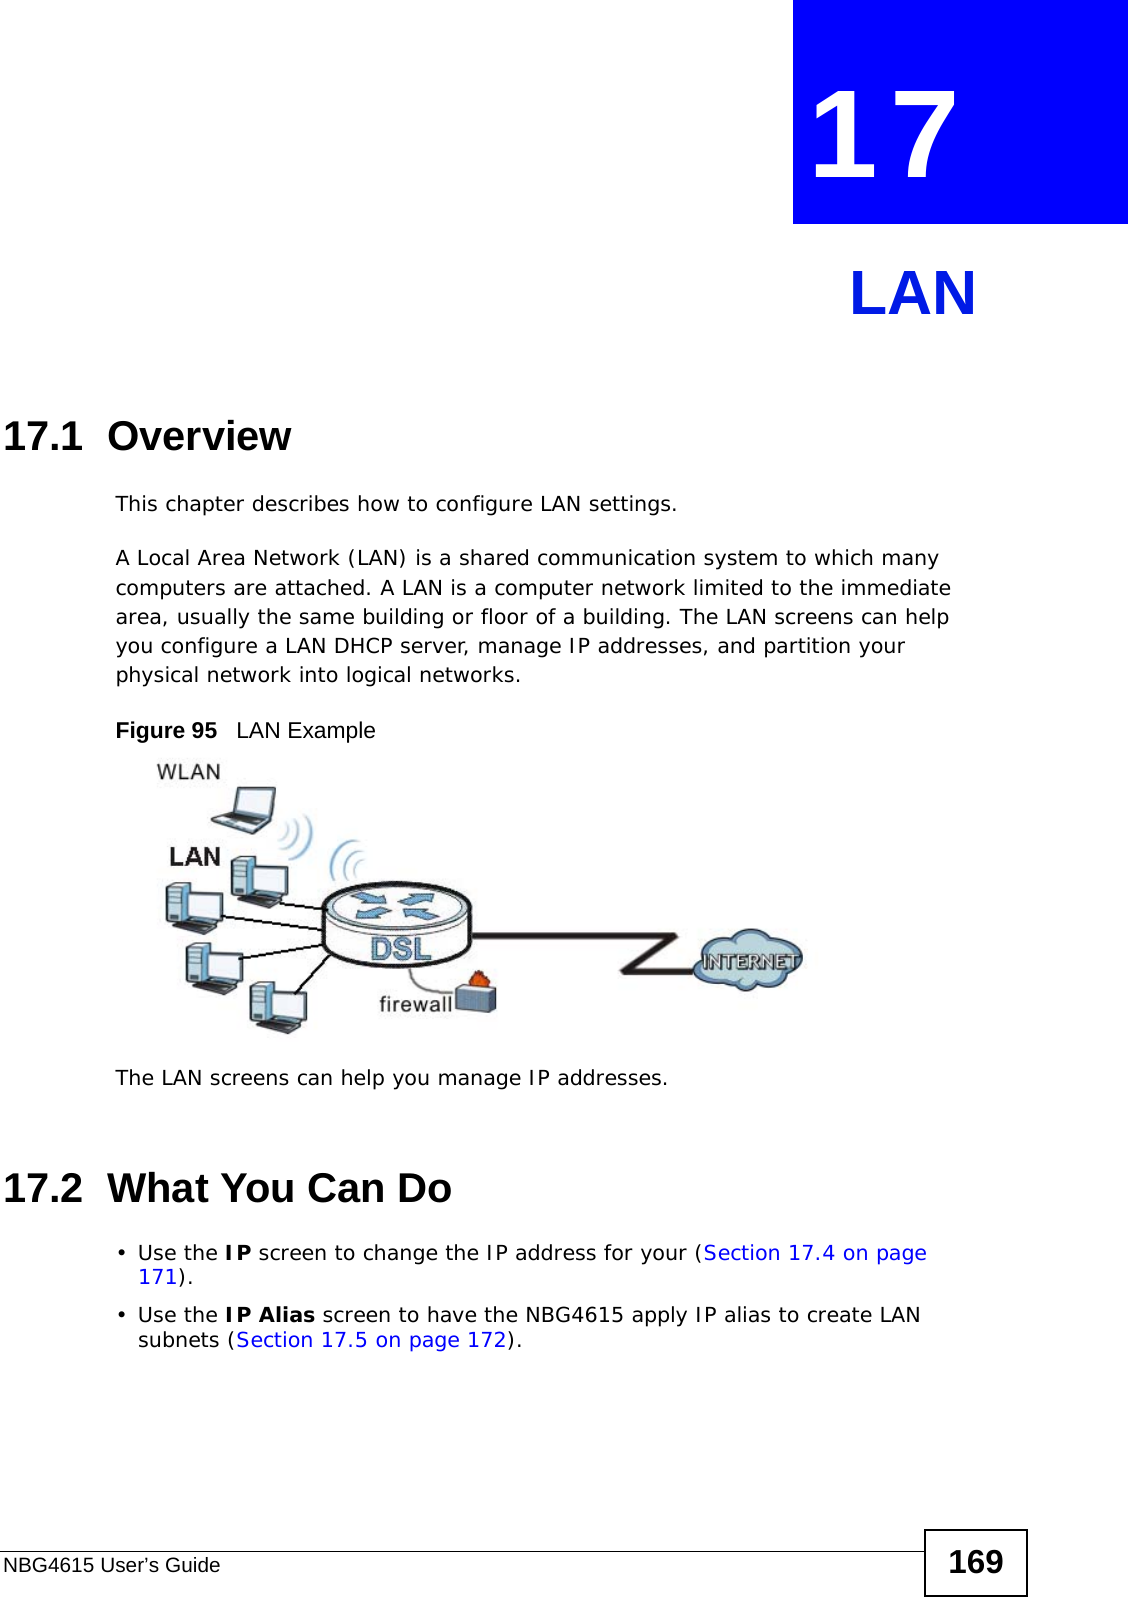 NBG4615 User’s Guide 169CHAPTER  17 LAN17.1  OverviewThis chapter describes how to configure LAN settings.A Local Area Network (LAN) is a shared communication system to which many computers are attached. A LAN is a computer network limited to the immediate area, usually the same building or floor of a building. The LAN screens can help you configure a LAN DHCP server, manage IP addresses, and partition your physical network into logical networks.Figure 95   LAN ExampleThe LAN screens can help you manage IP addresses.17.2  What You Can Do•Use the IP screen to change the IP address for your (Section 17.4 on page 171).•Use the IP Alias screen to have the NBG4615 apply IP alias to create LAN subnets (Section 17.5 on page 172).